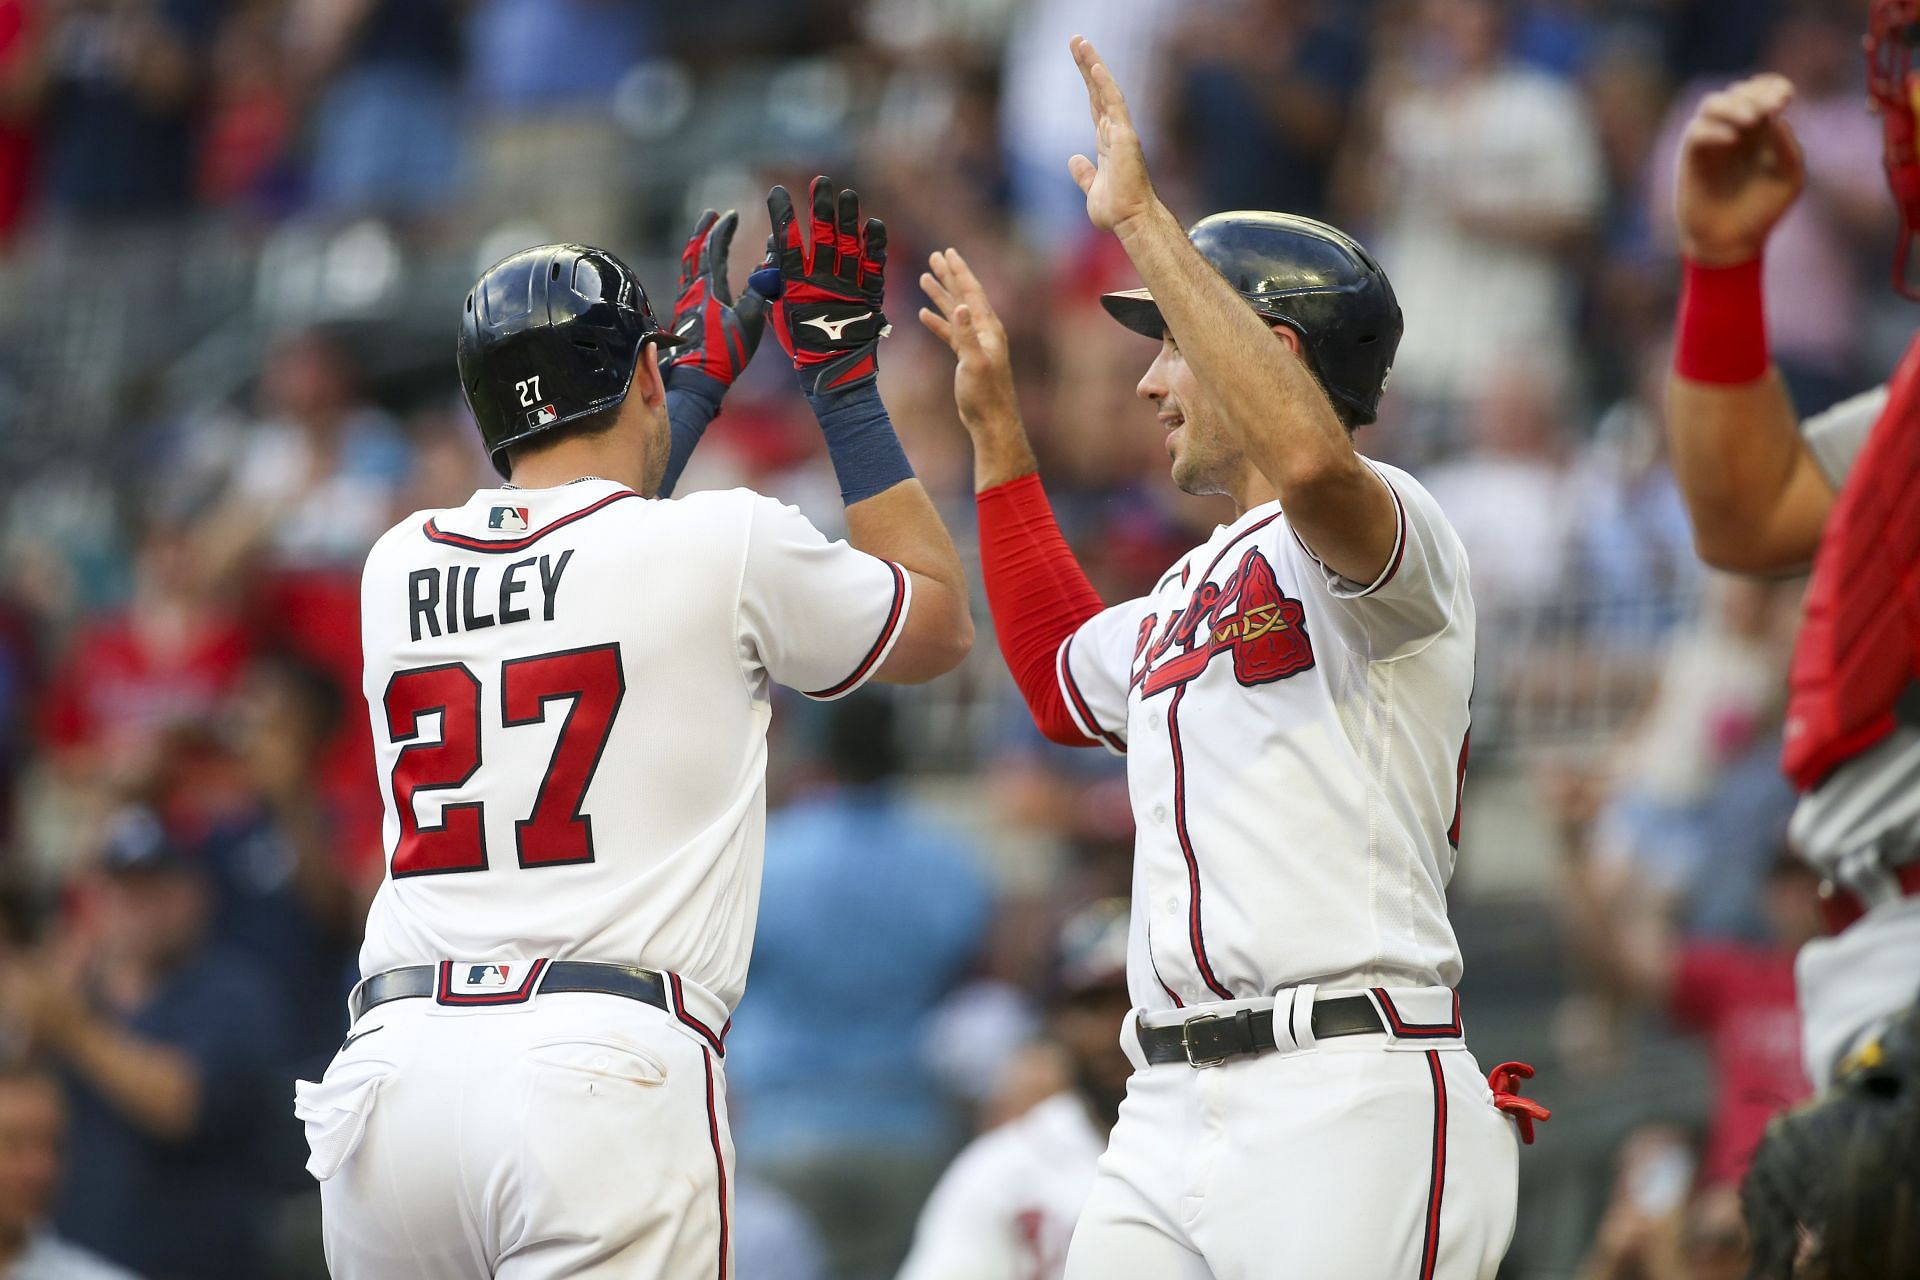 The Braves have been rolling in recent weeks